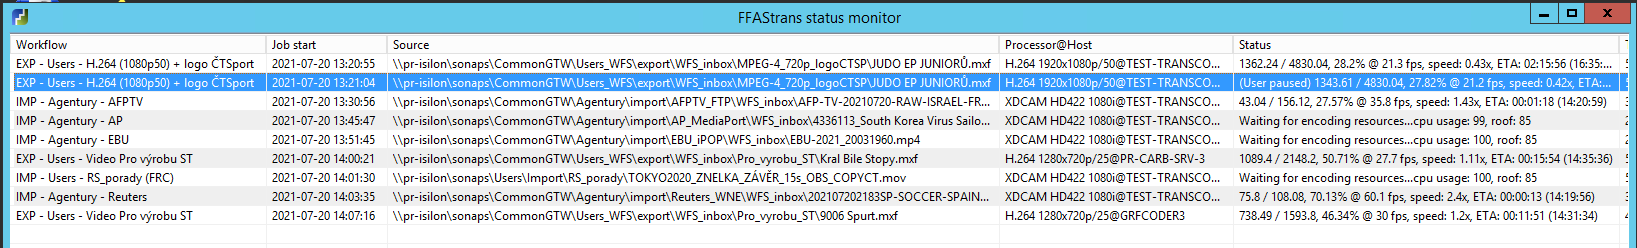 FFAStrans status monitor - one transcode node overloaded while others not utilized.PNG